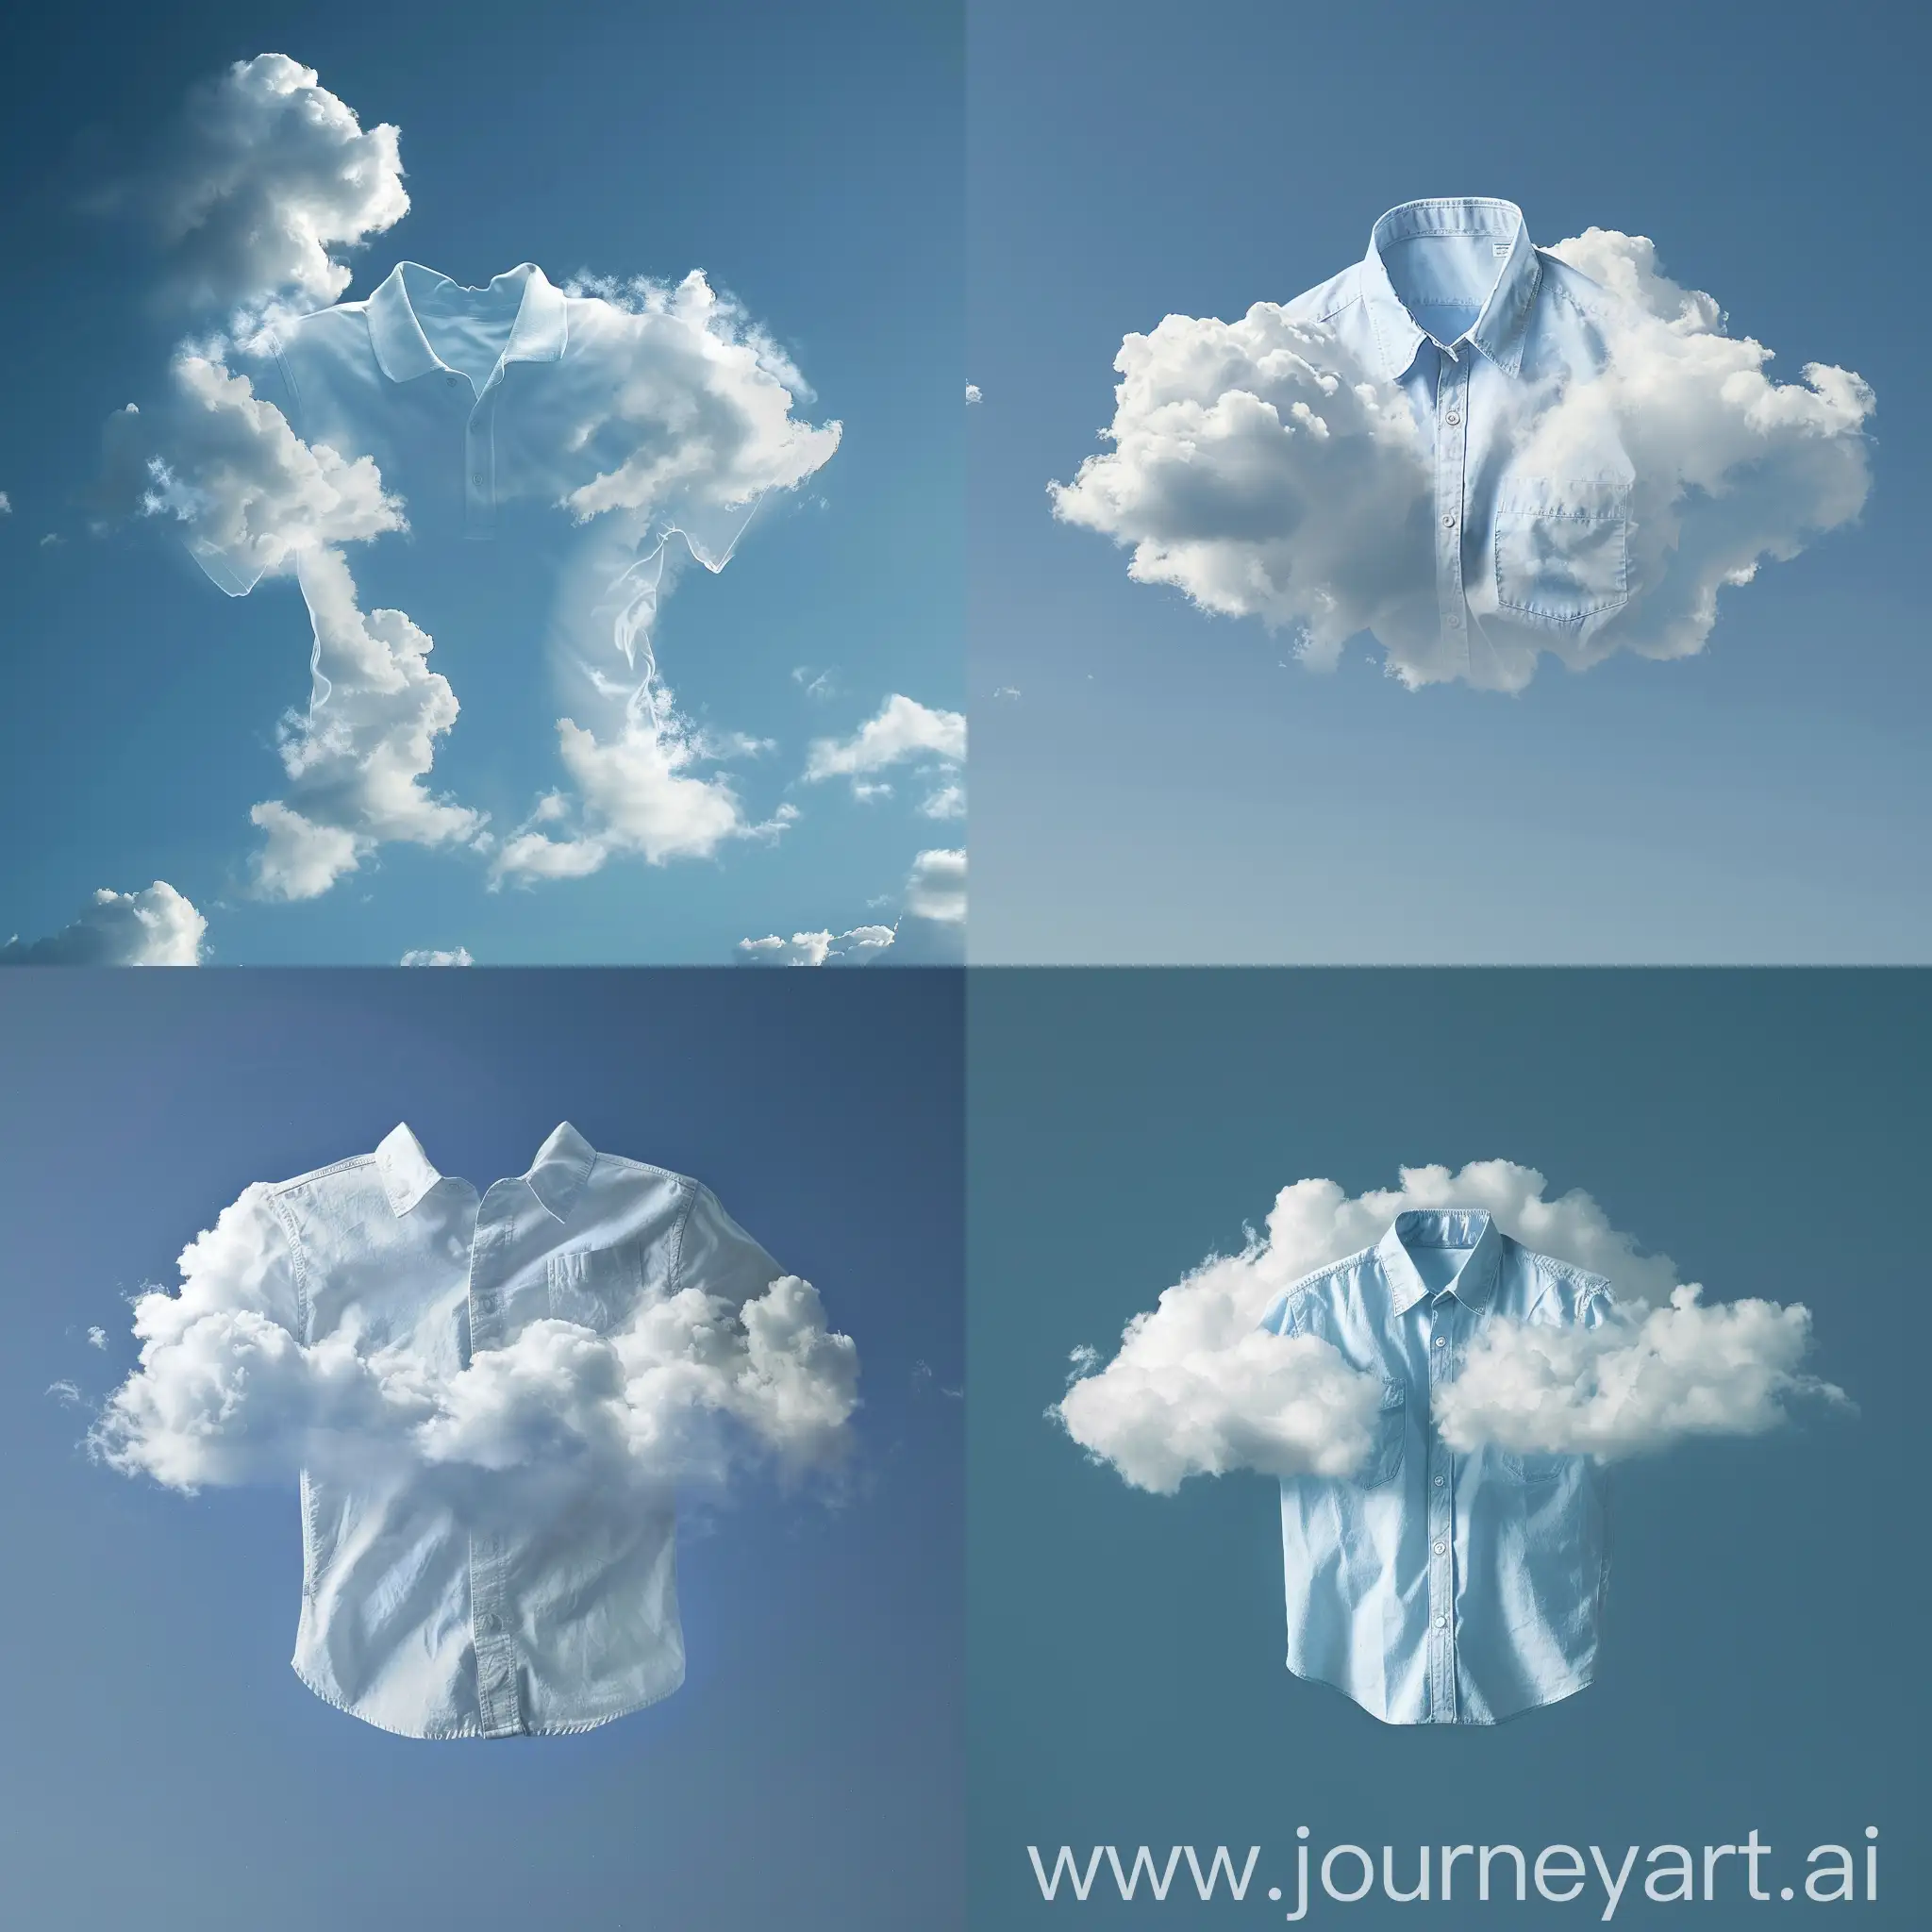 ShirtShaped-Cloud-Floating-in-the-Sky